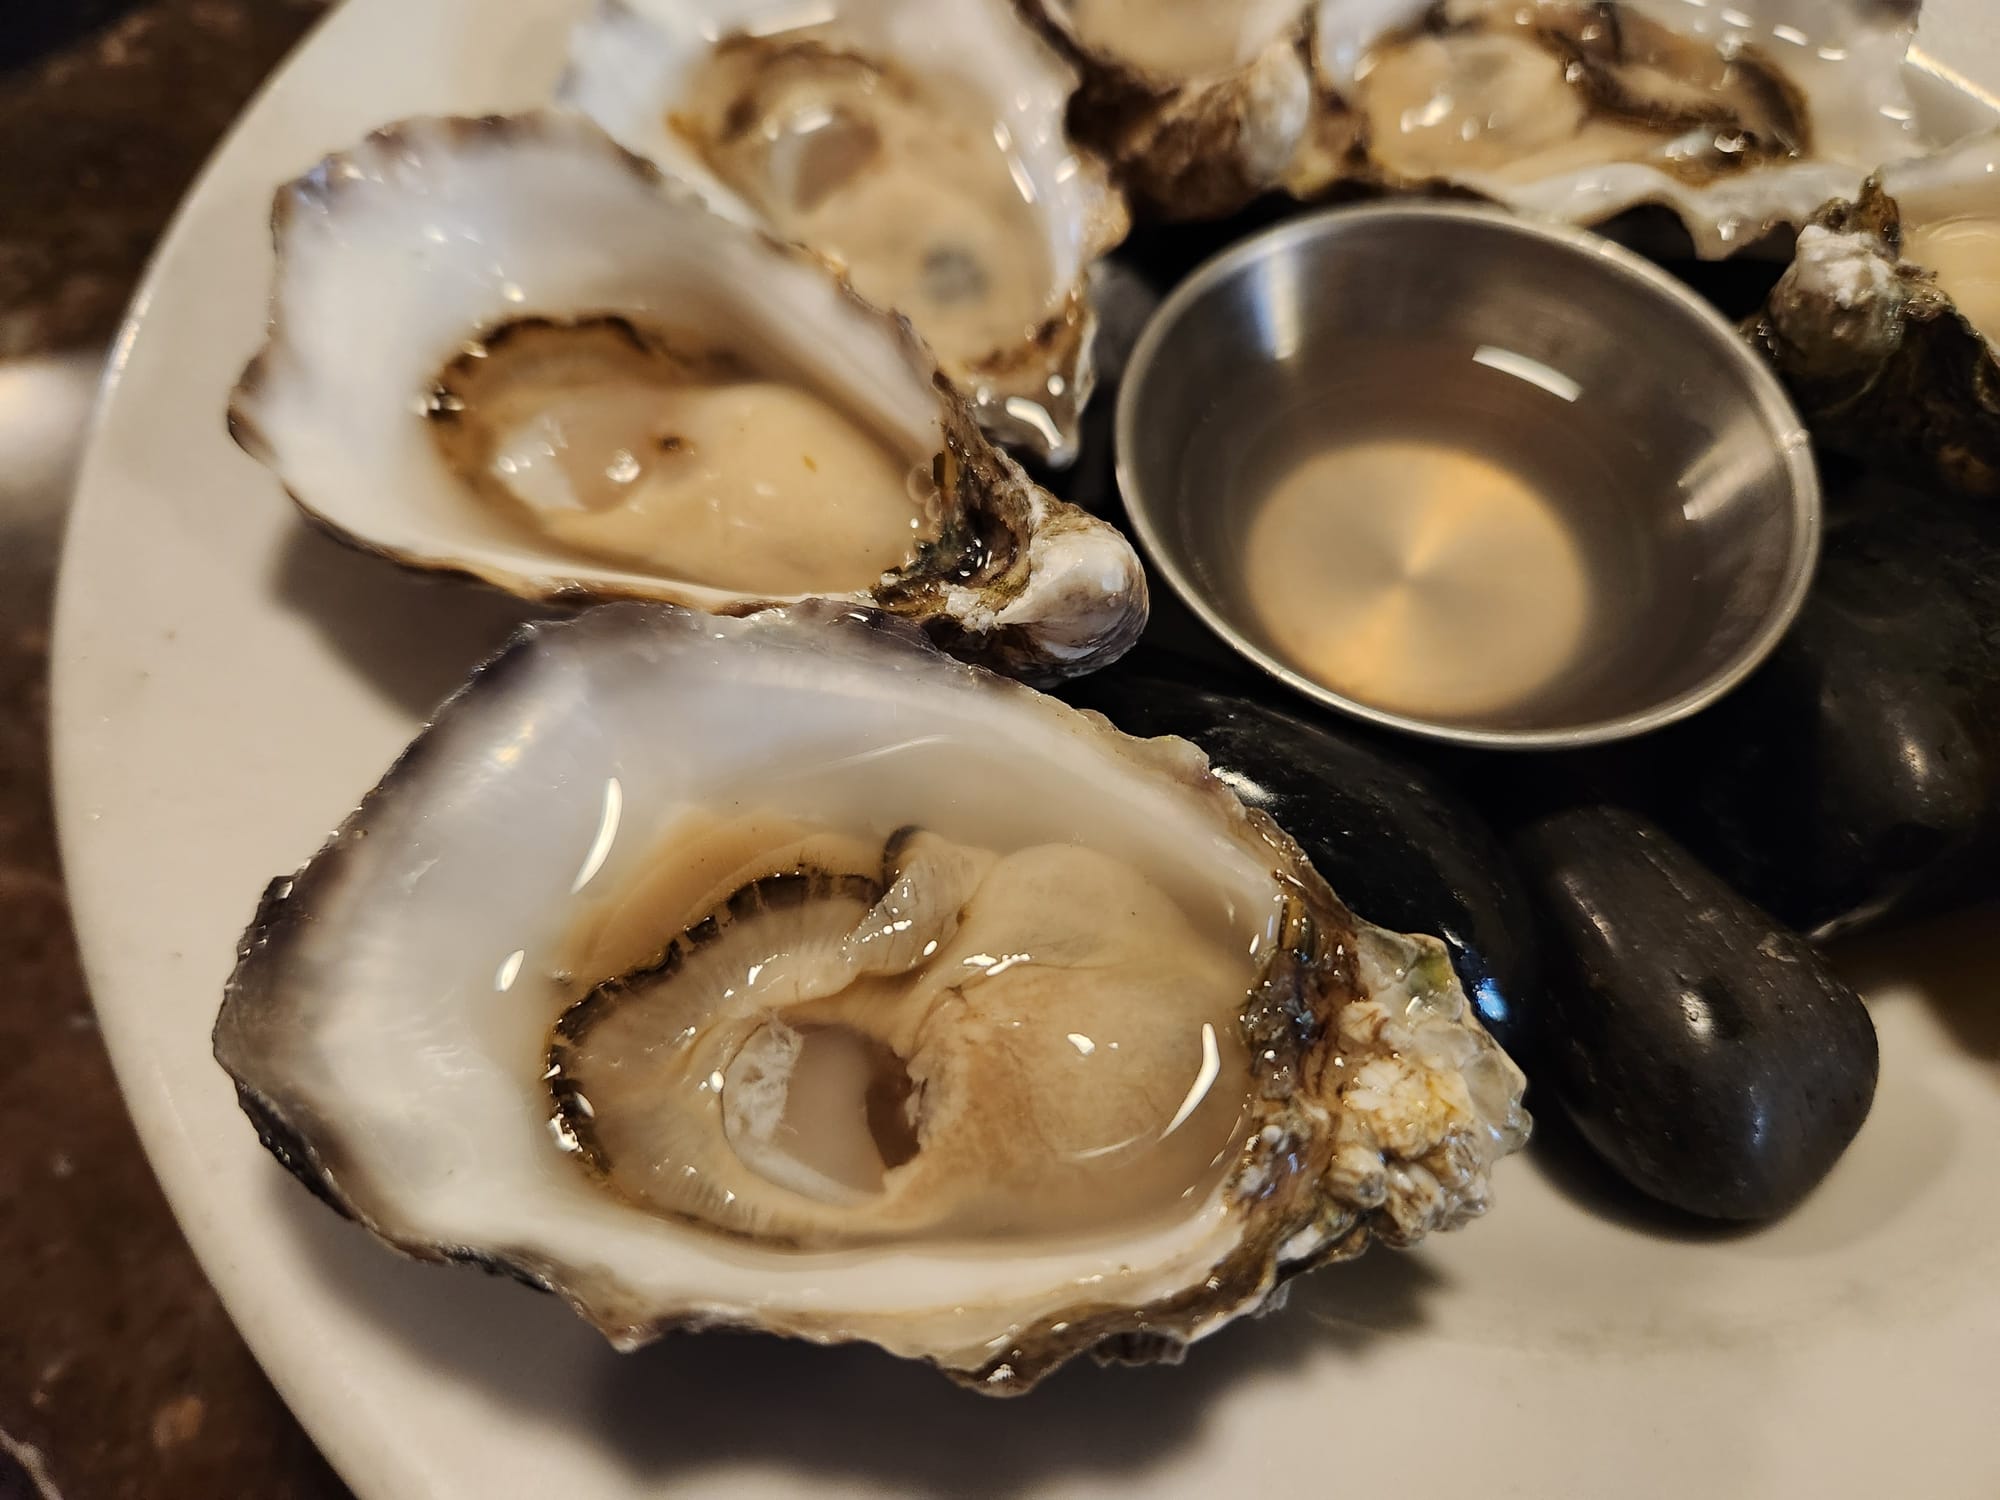 A plate of oysters.